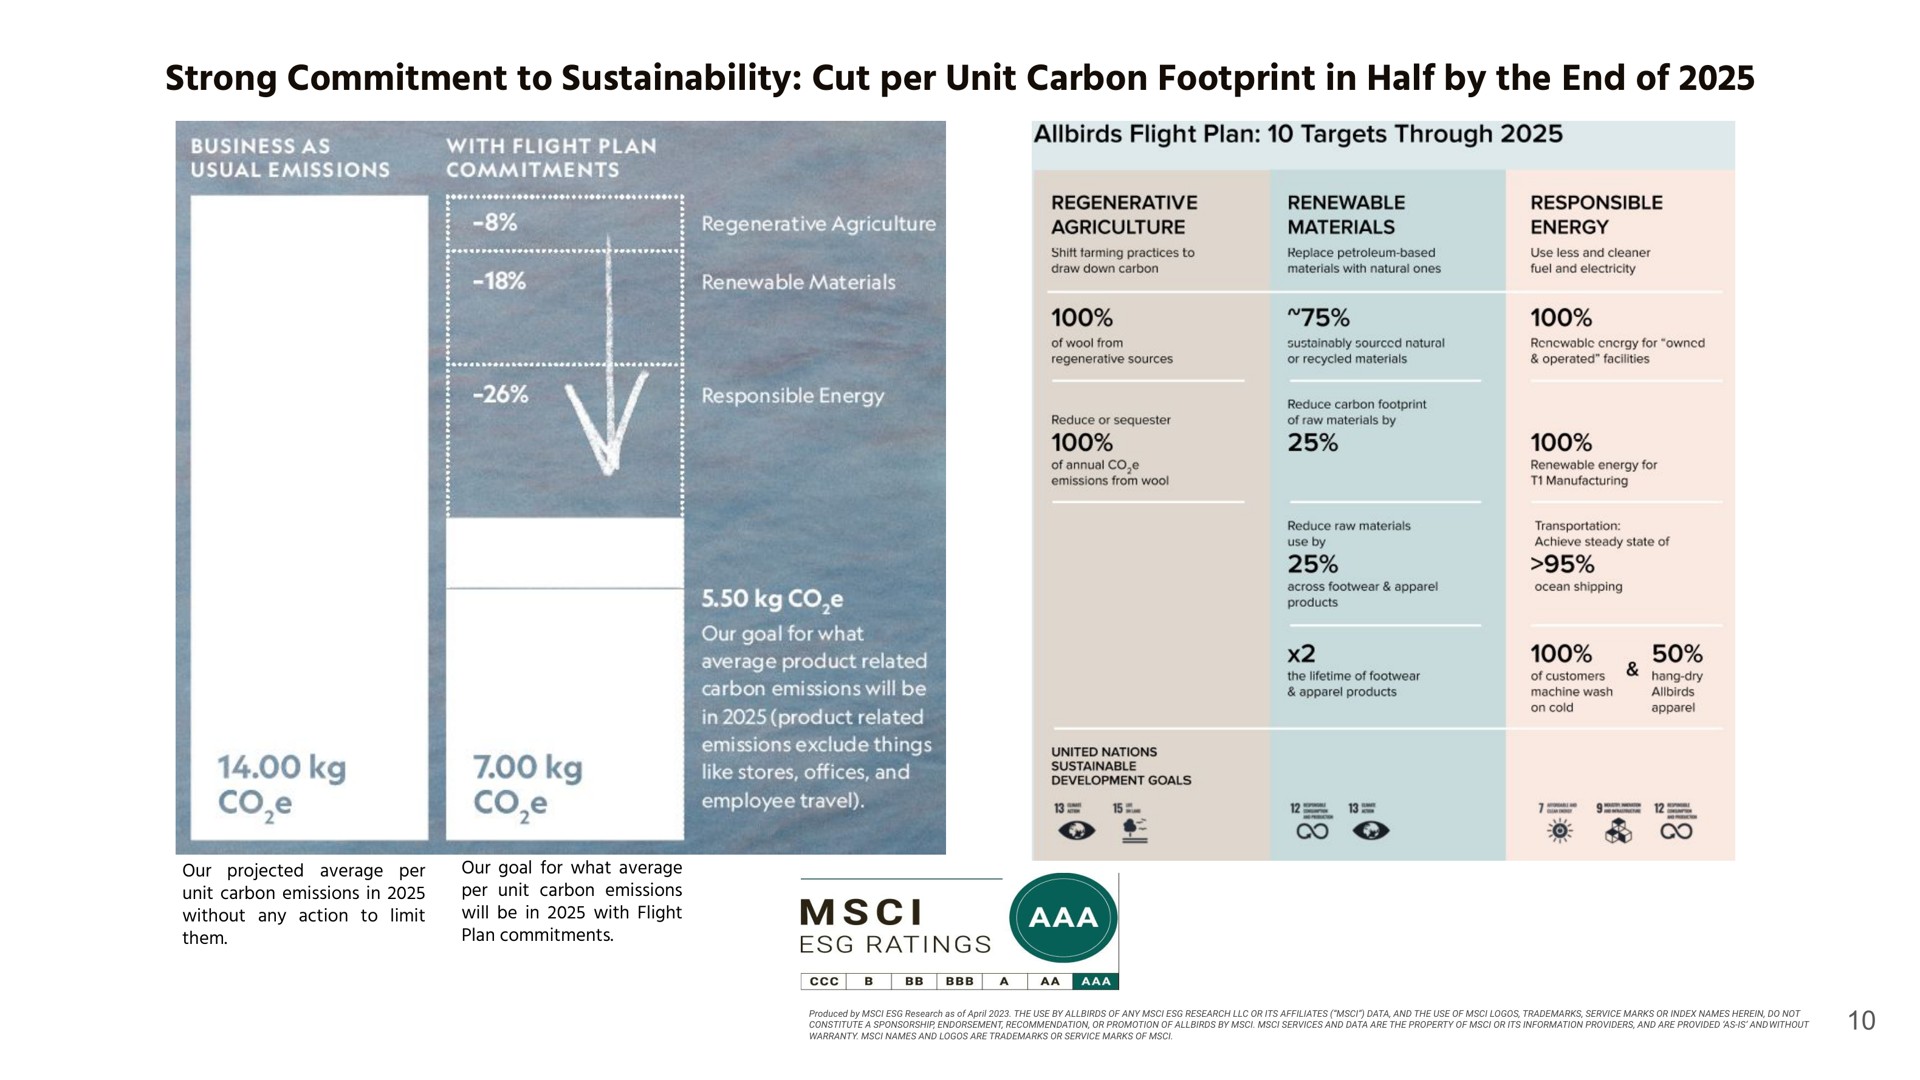 strong commitment to cut per unit carbon footprint in half by the end of a | Allbirds